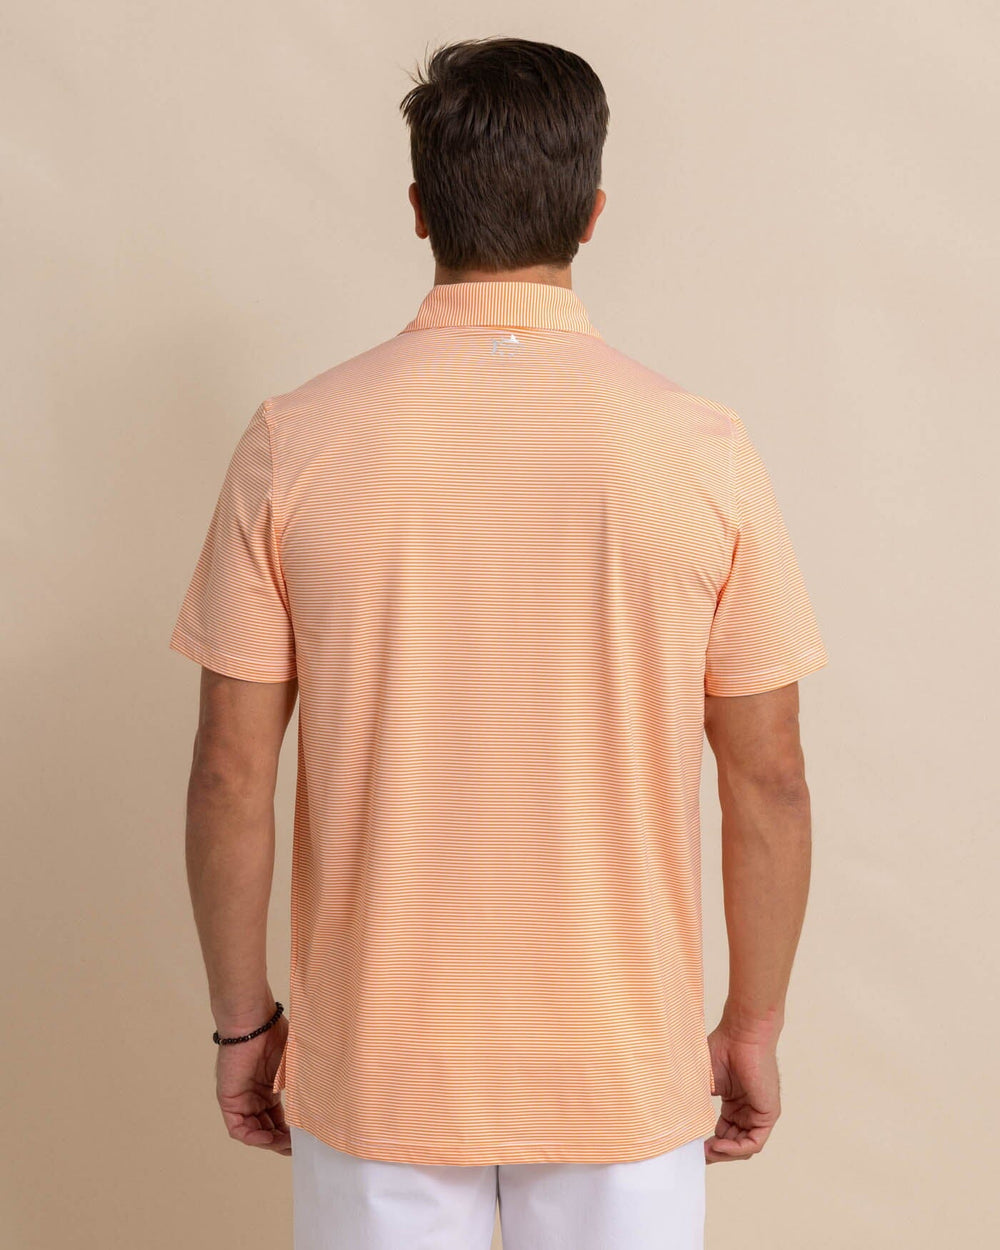 The back view of the Southern Tide brrr-eeze-meadowbrook-stripe-polo by Southern Tide - Tangerine Orange